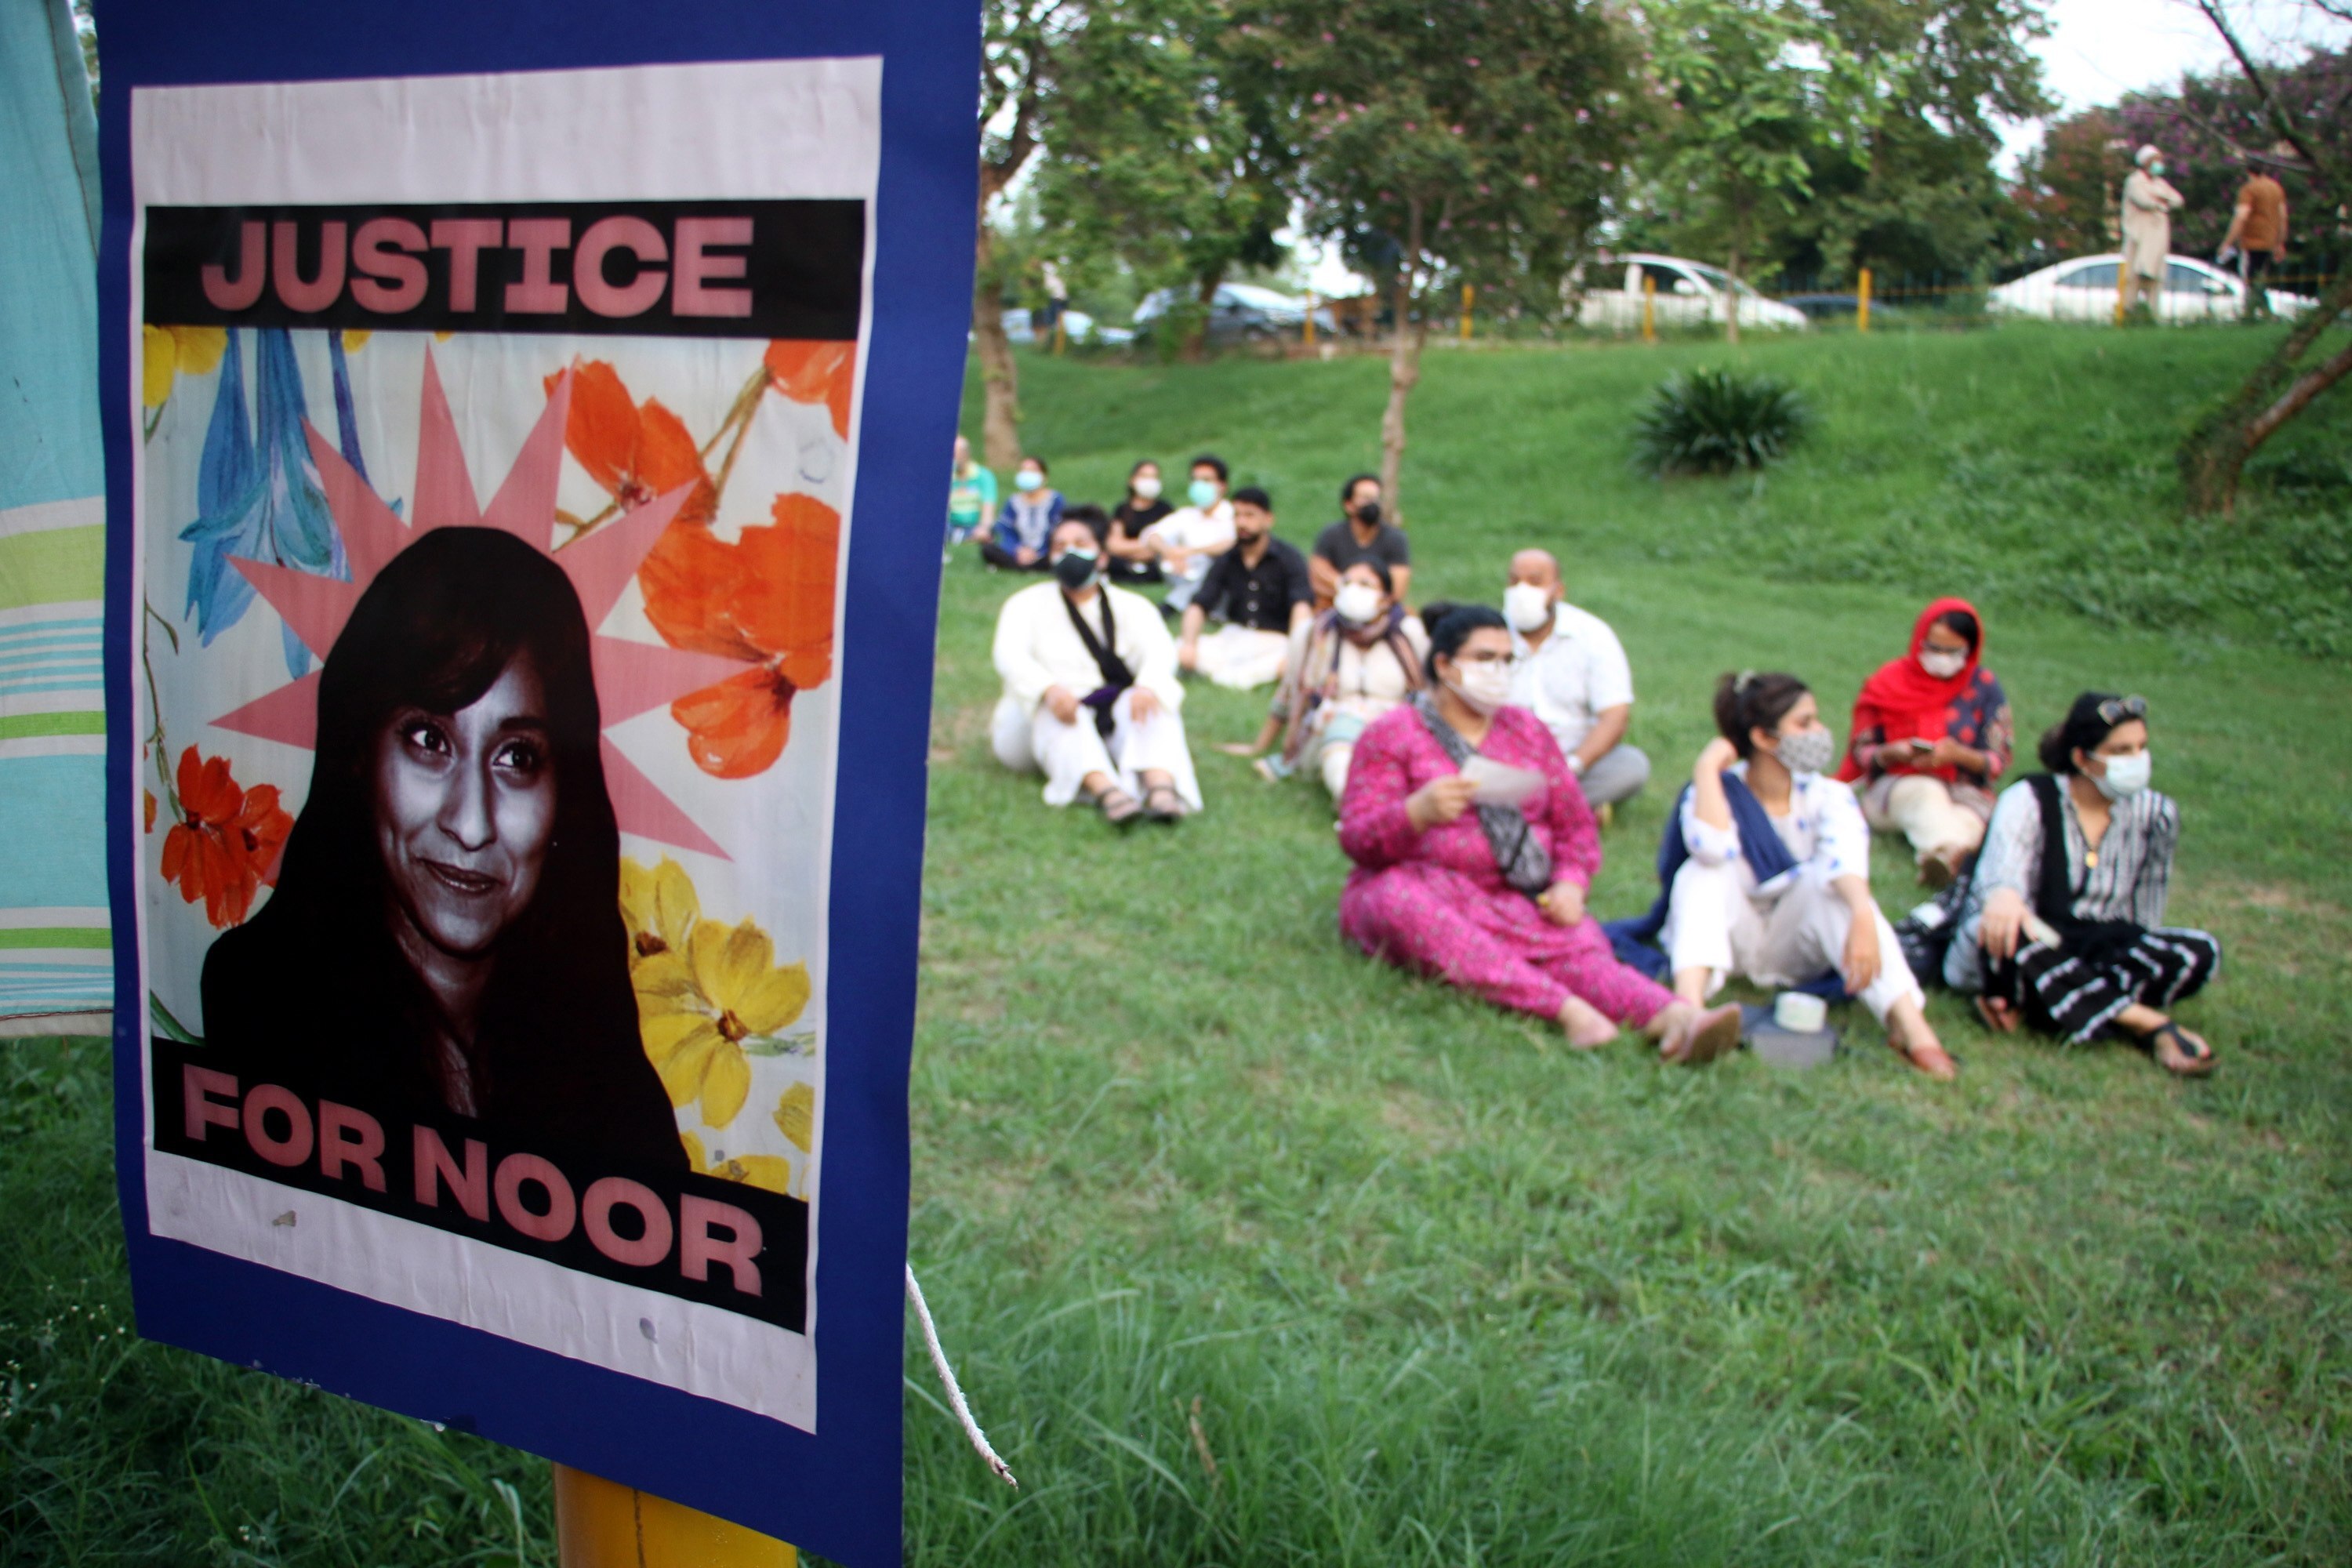 A protest for justice was held after Noor Mukadam was murdered. Photo: EPA